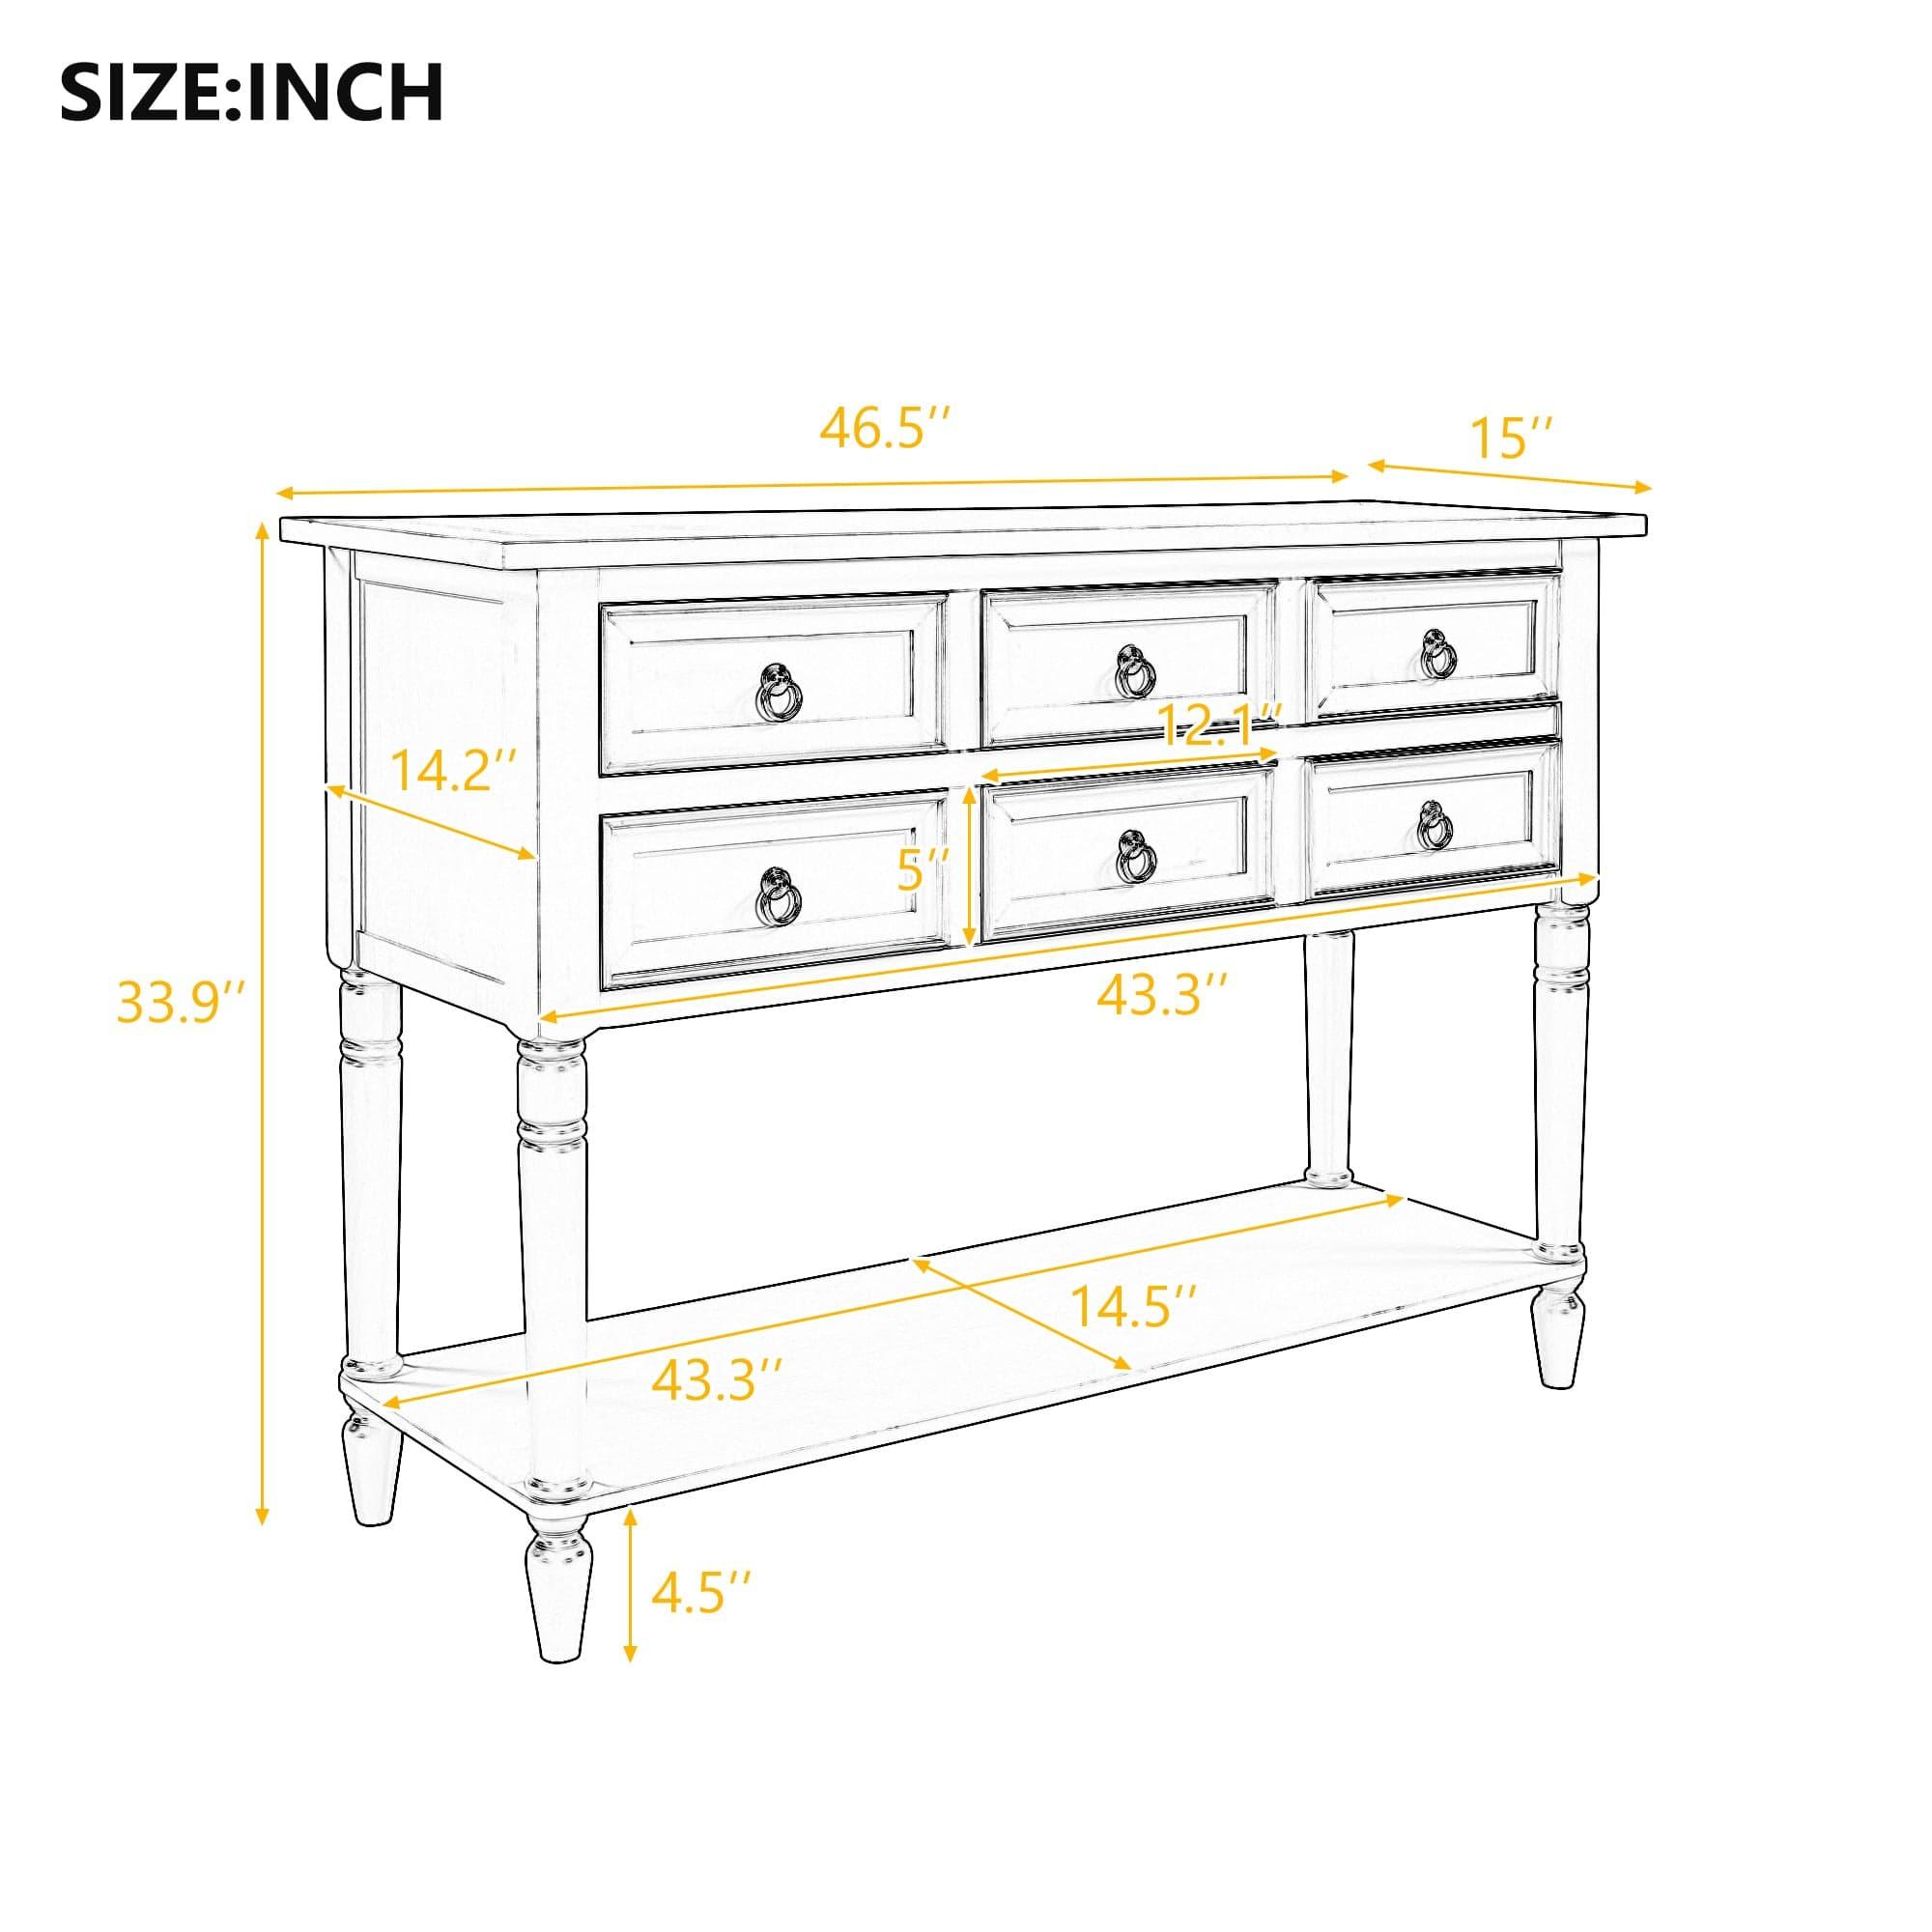 Shop U_STYLE 46'' Modern Console Table Sofa Table for Living Room with 6 Drawers and 1 Shelf Mademoiselle Home Decor